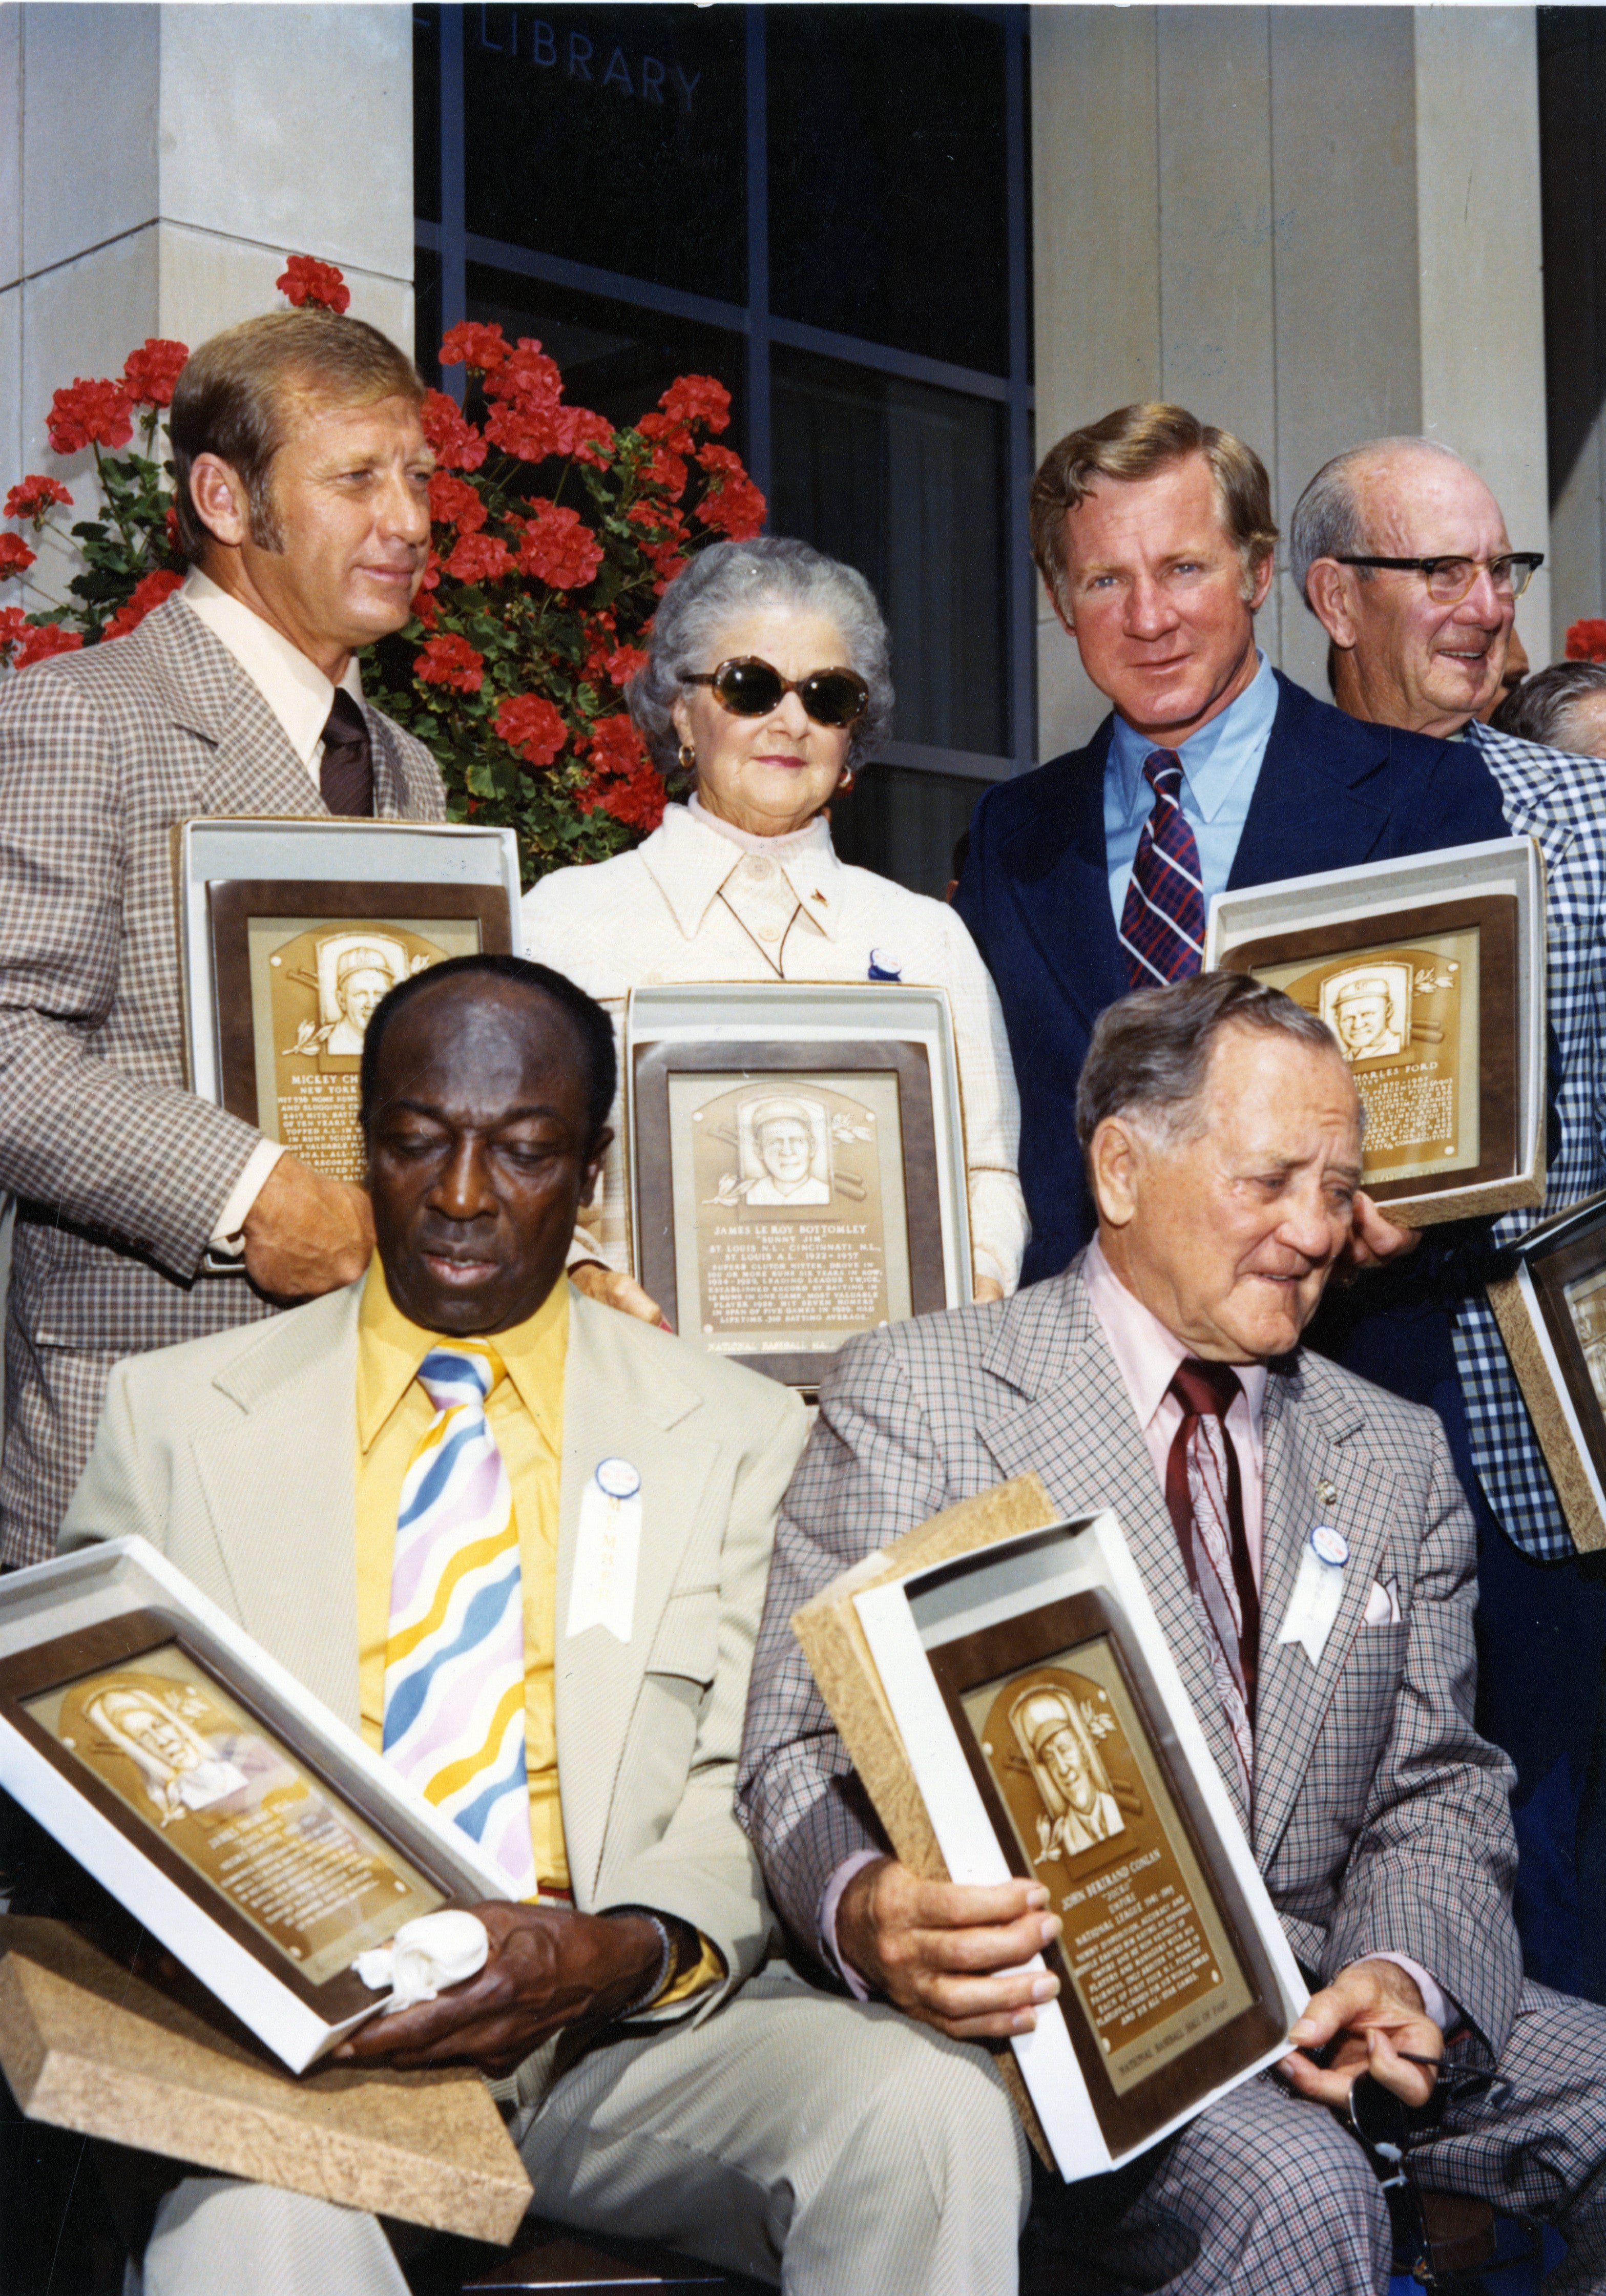 As part of Class of 1974, Cool Papa Bell made history